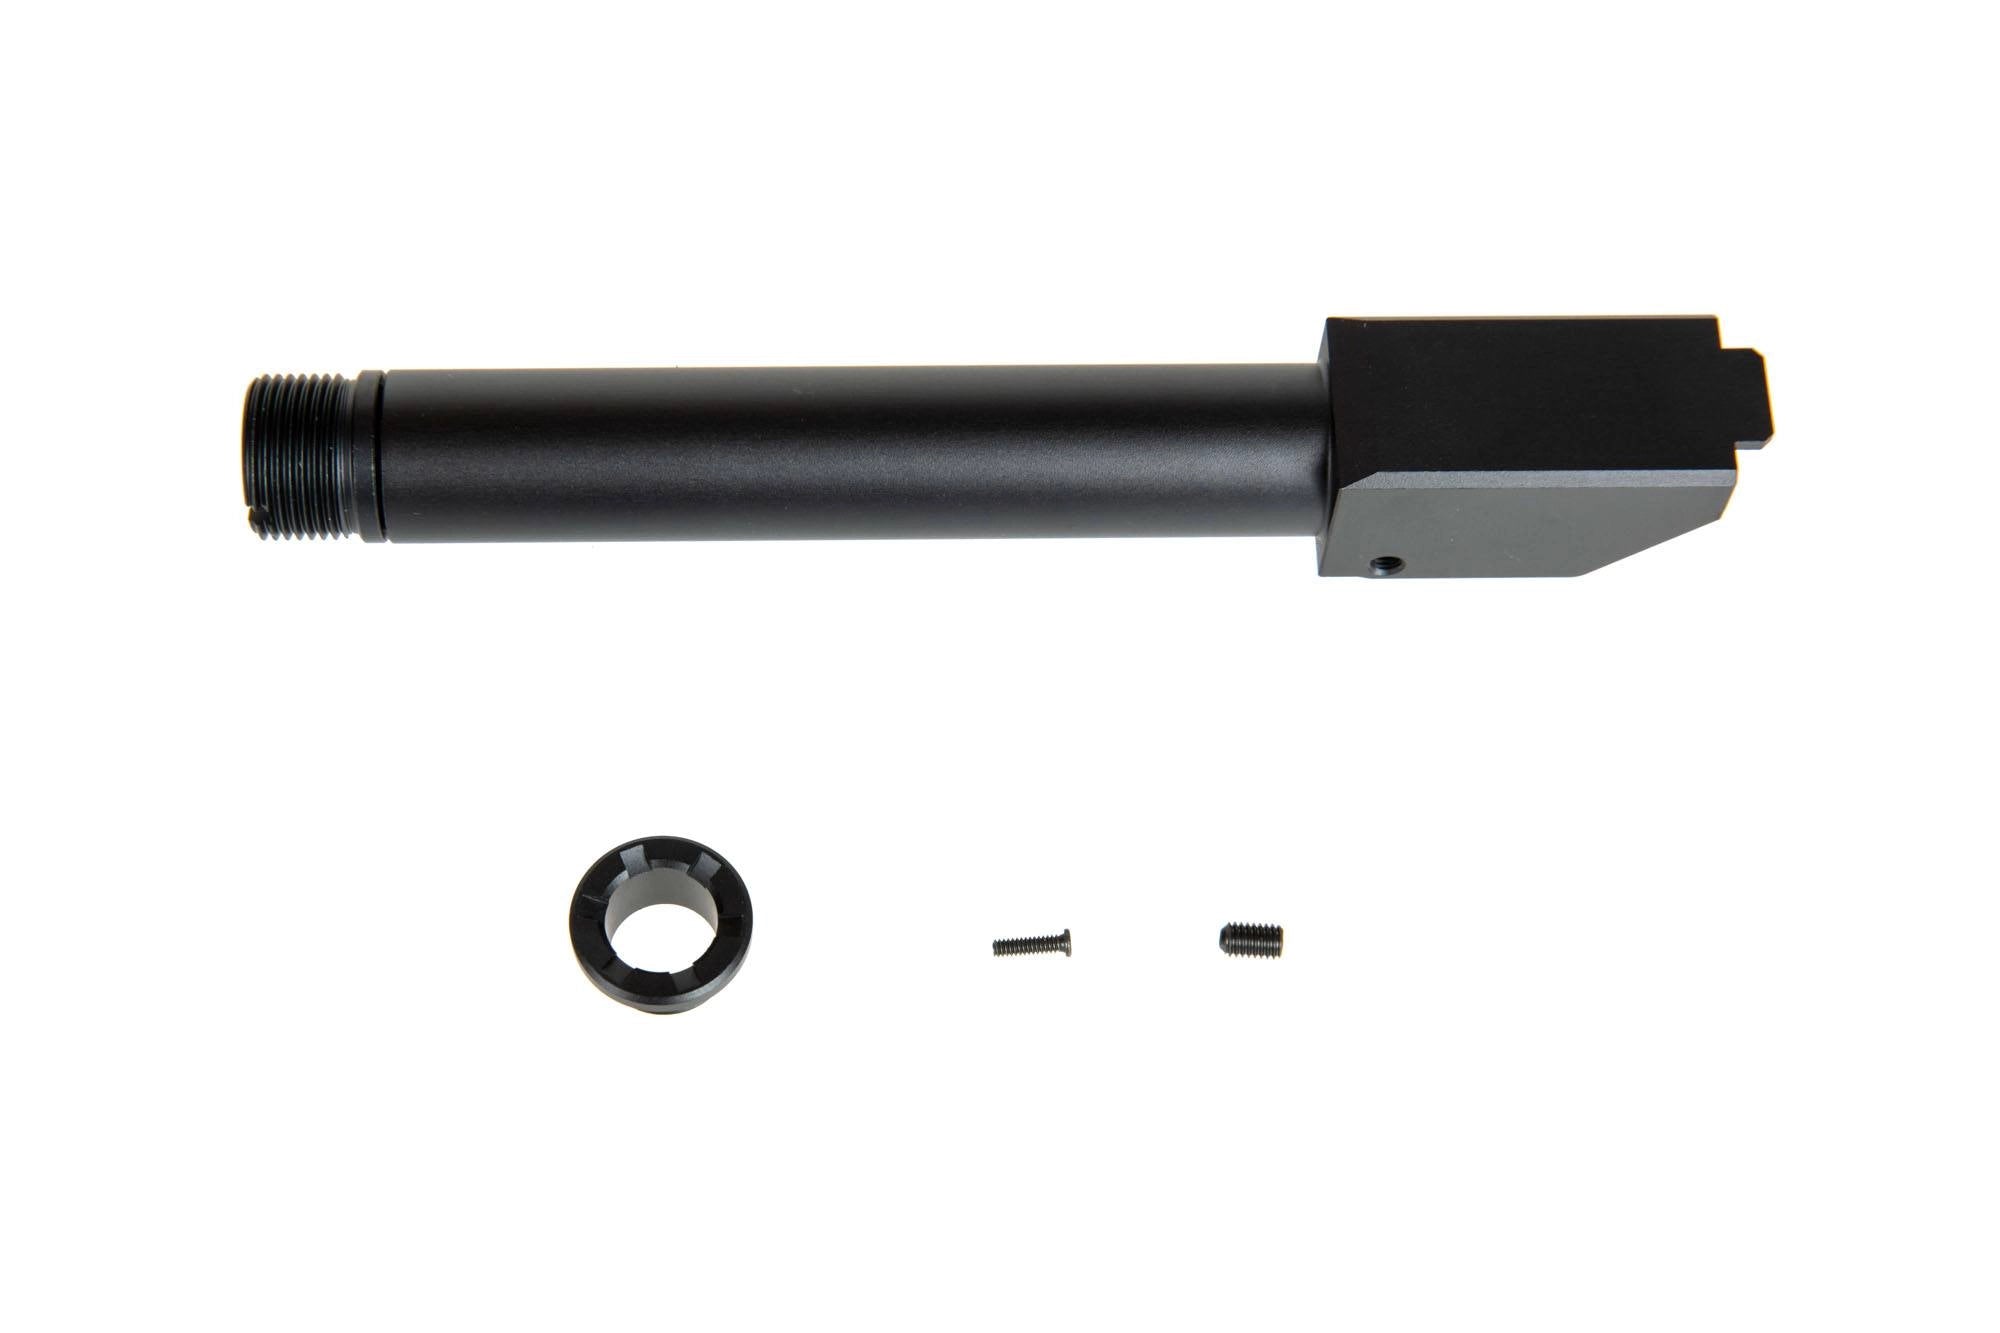 Non-Recoiling 2 Way Fixed" Outer Barrel for TM G17/G18C/G22 Replicas - Black"-1